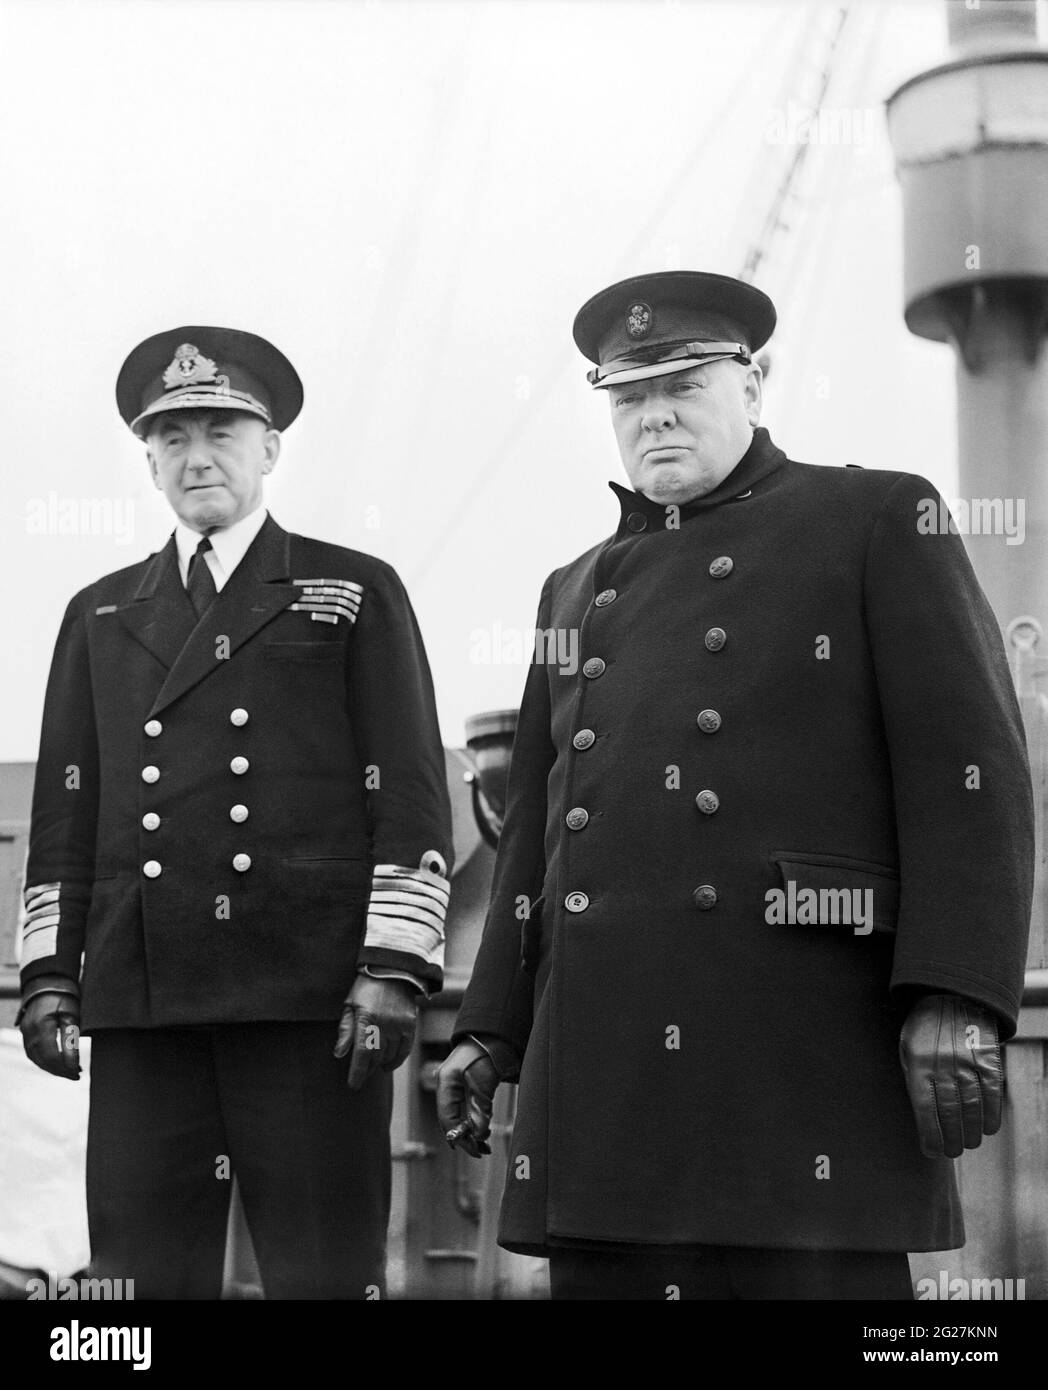 Premierminister Winston Churchill mit Sir Dudley Pound an Bord der RMS Queen Mary, 1943. Stockfoto